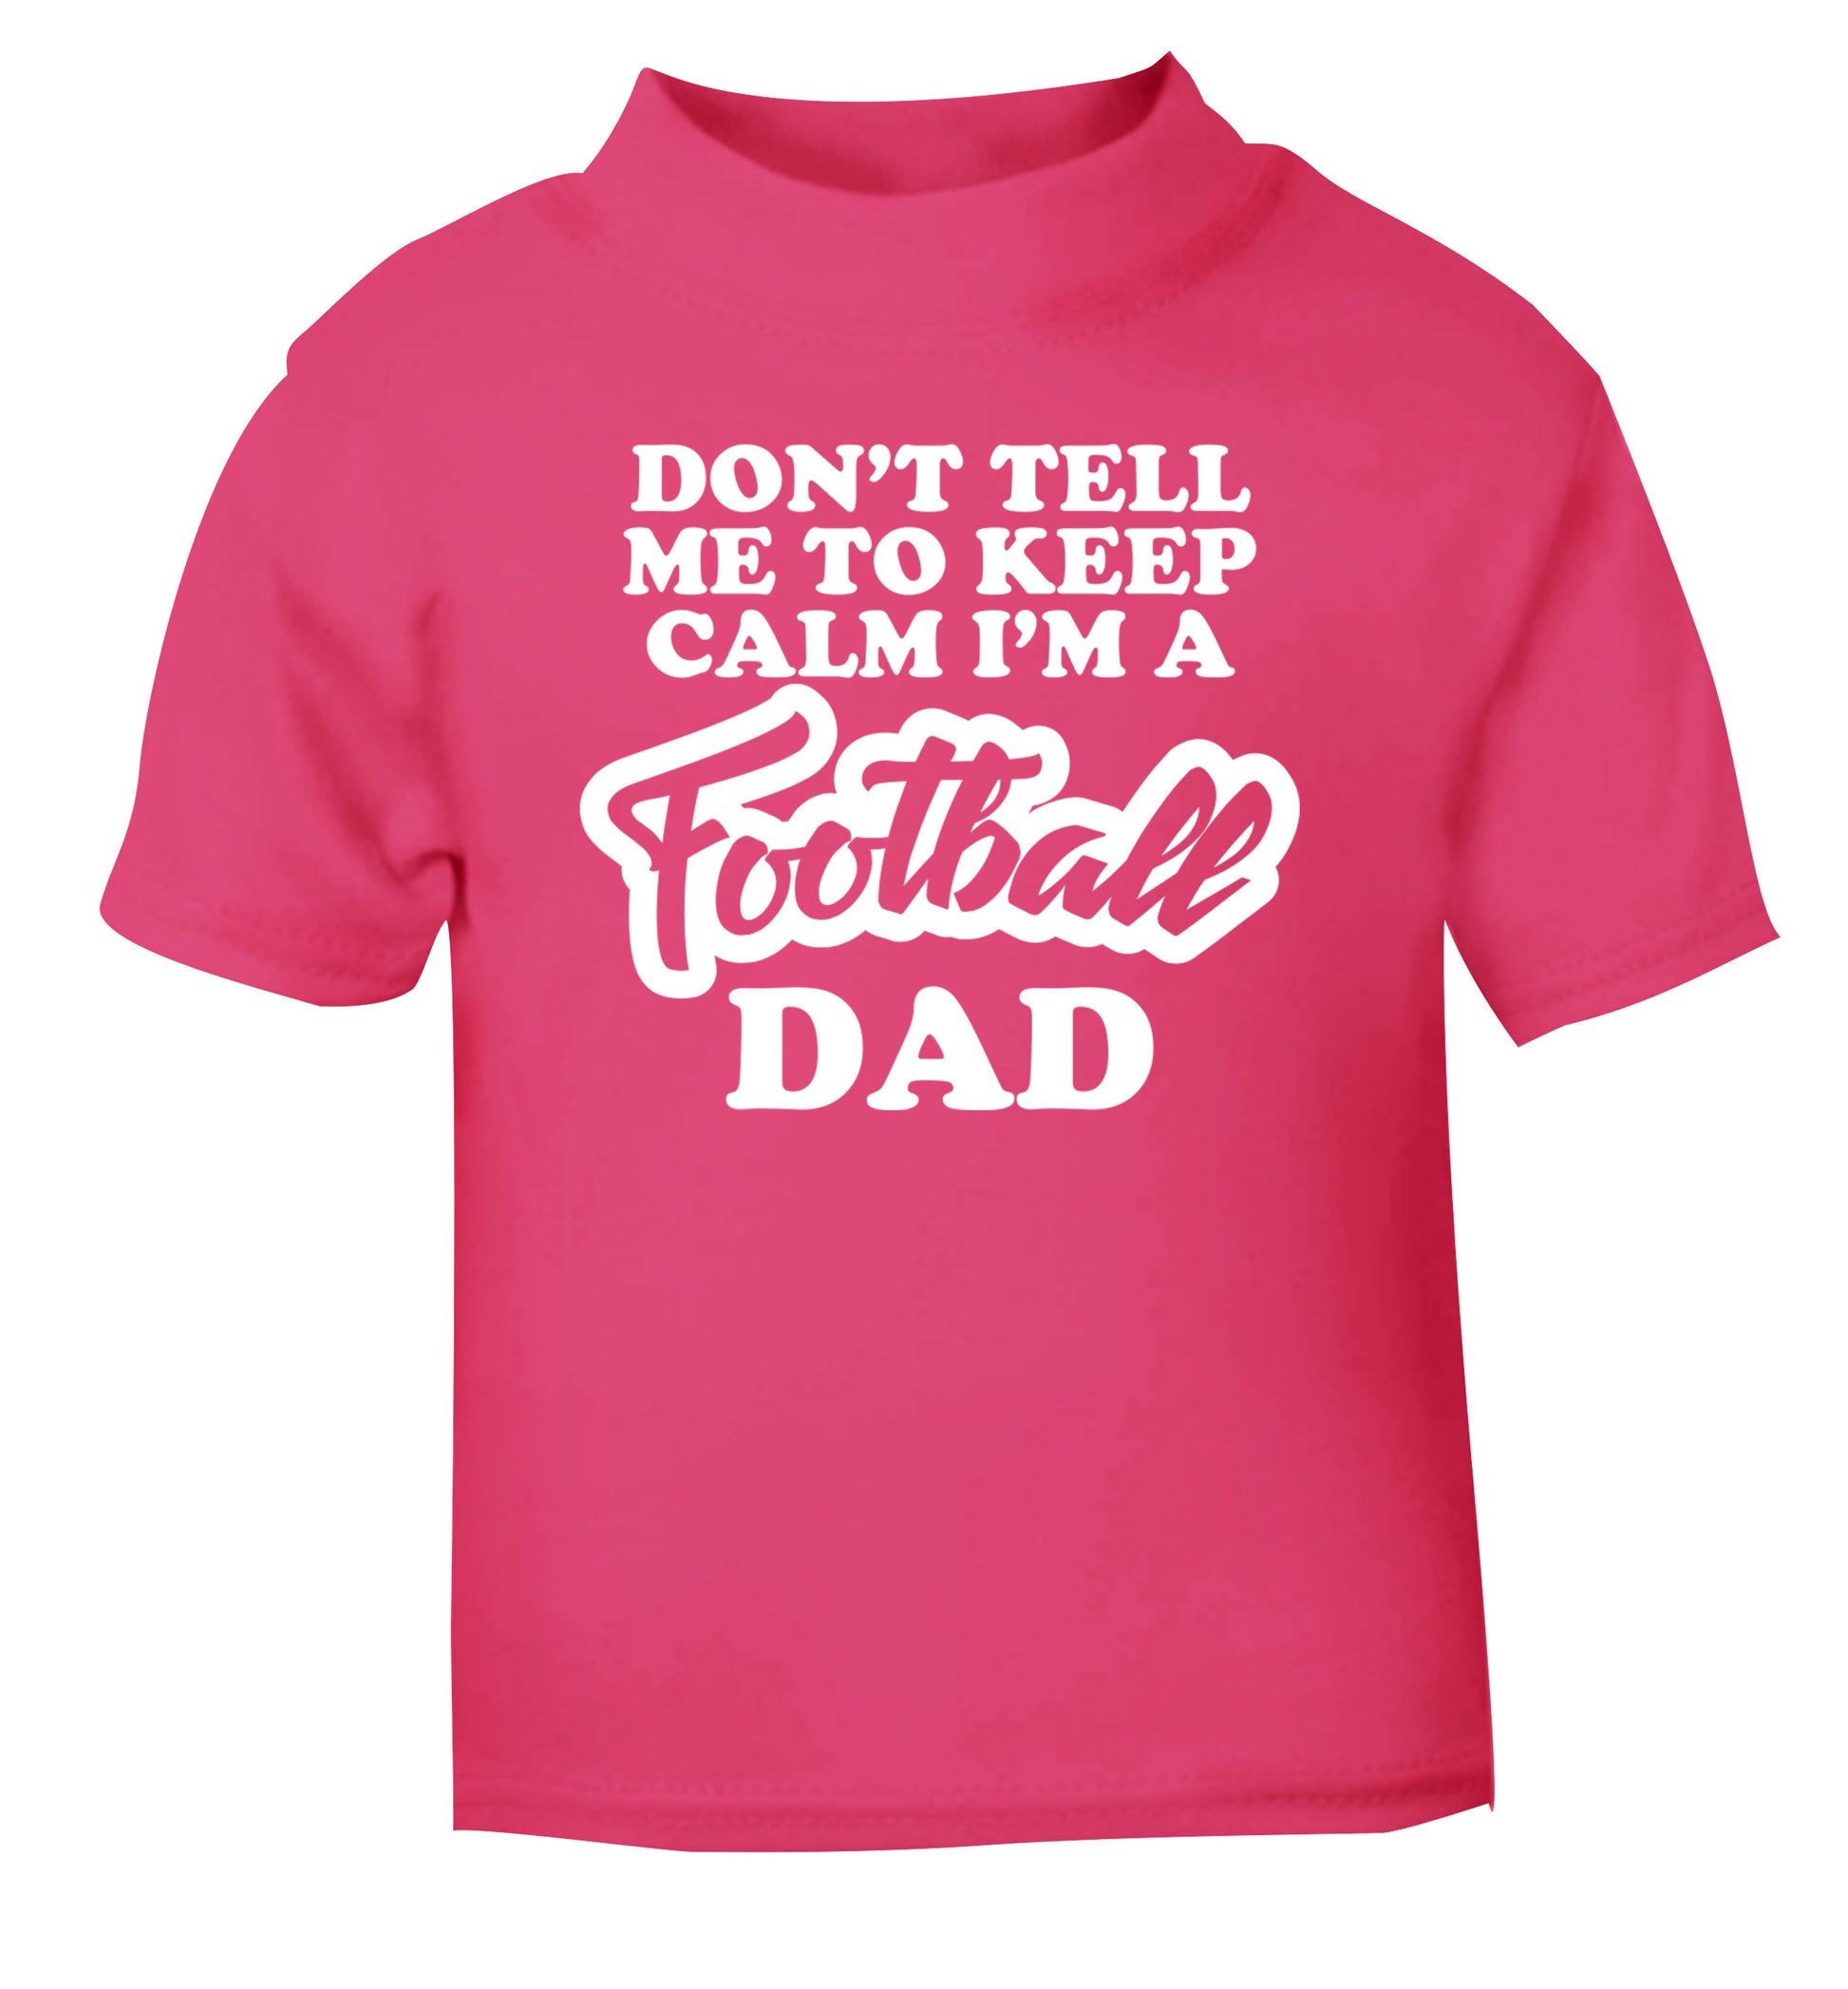 Don't tell me to keep calm I'm a football dad pink Baby Toddler Tshirt 2 Years